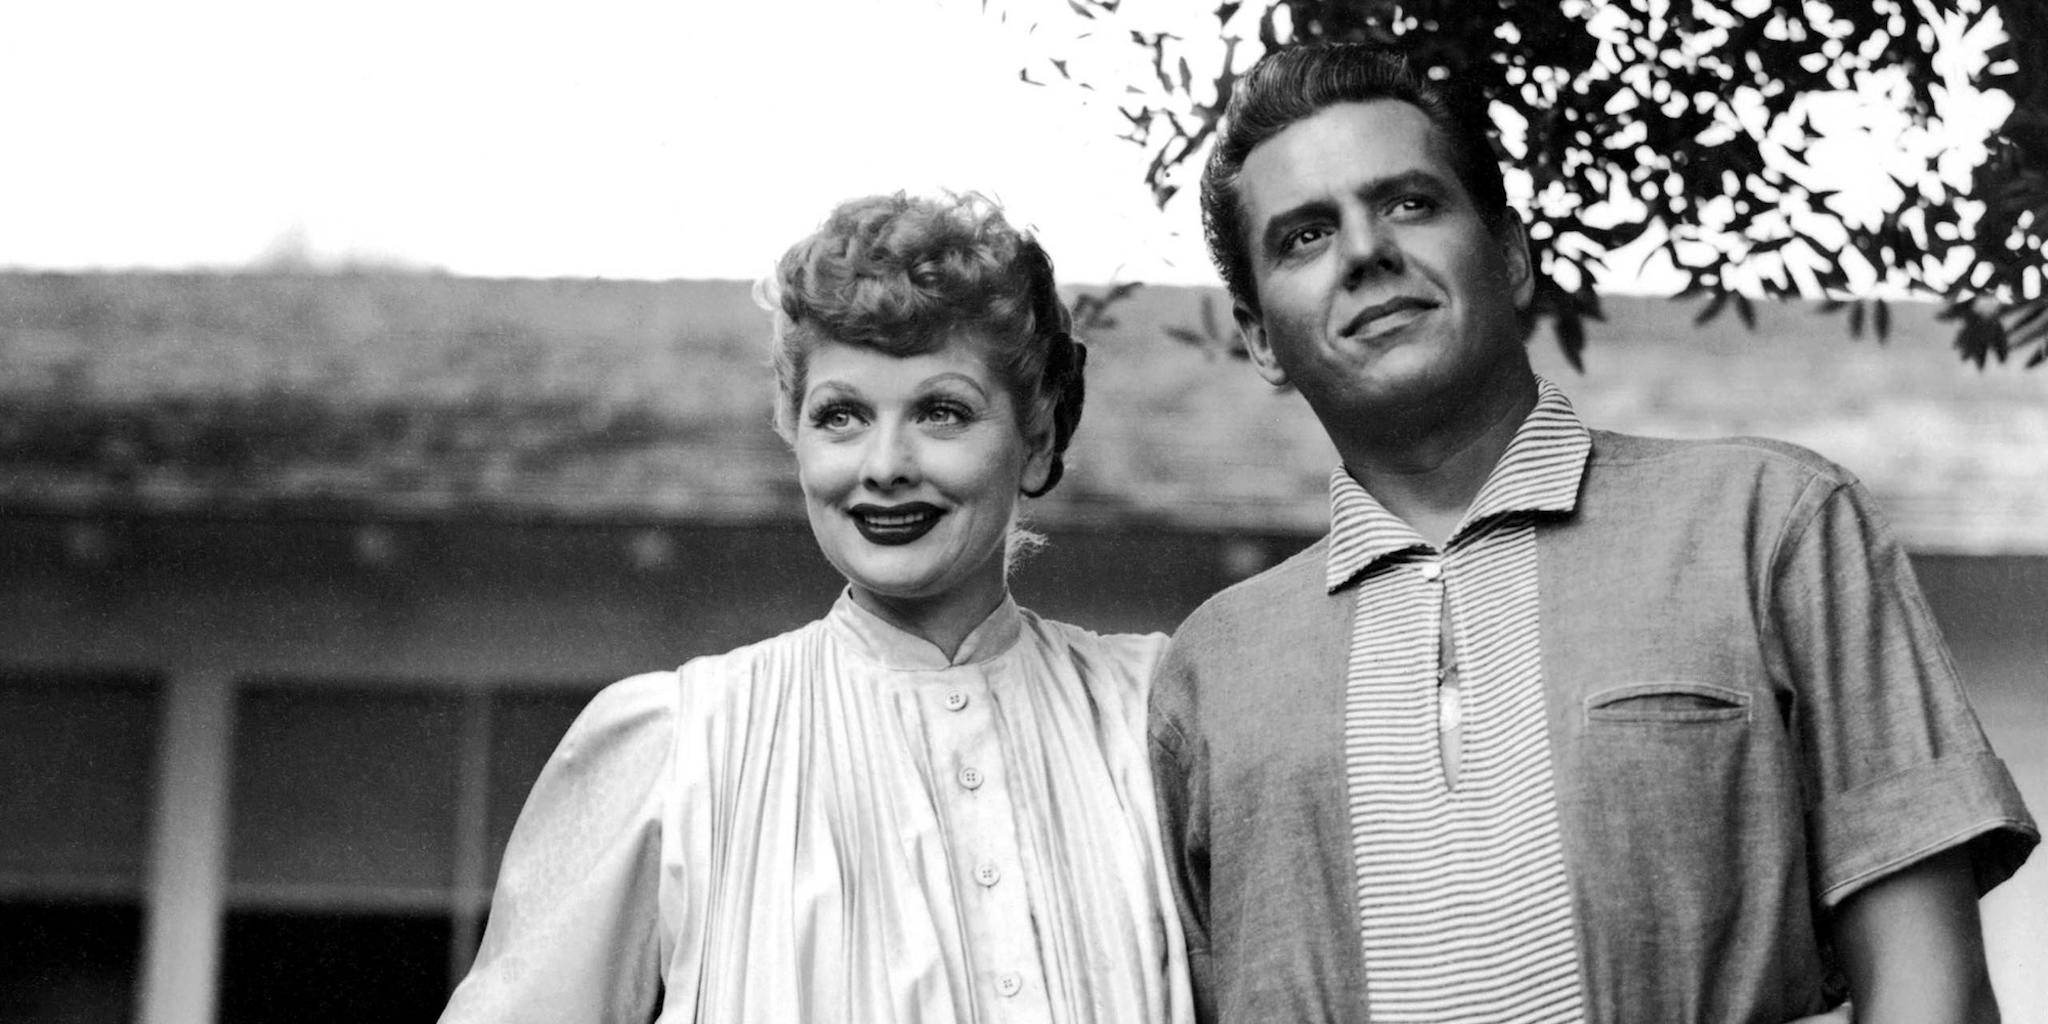 ‘Lucy and Desi’ is a conventional and intimate look at one of TV’s most famous couples